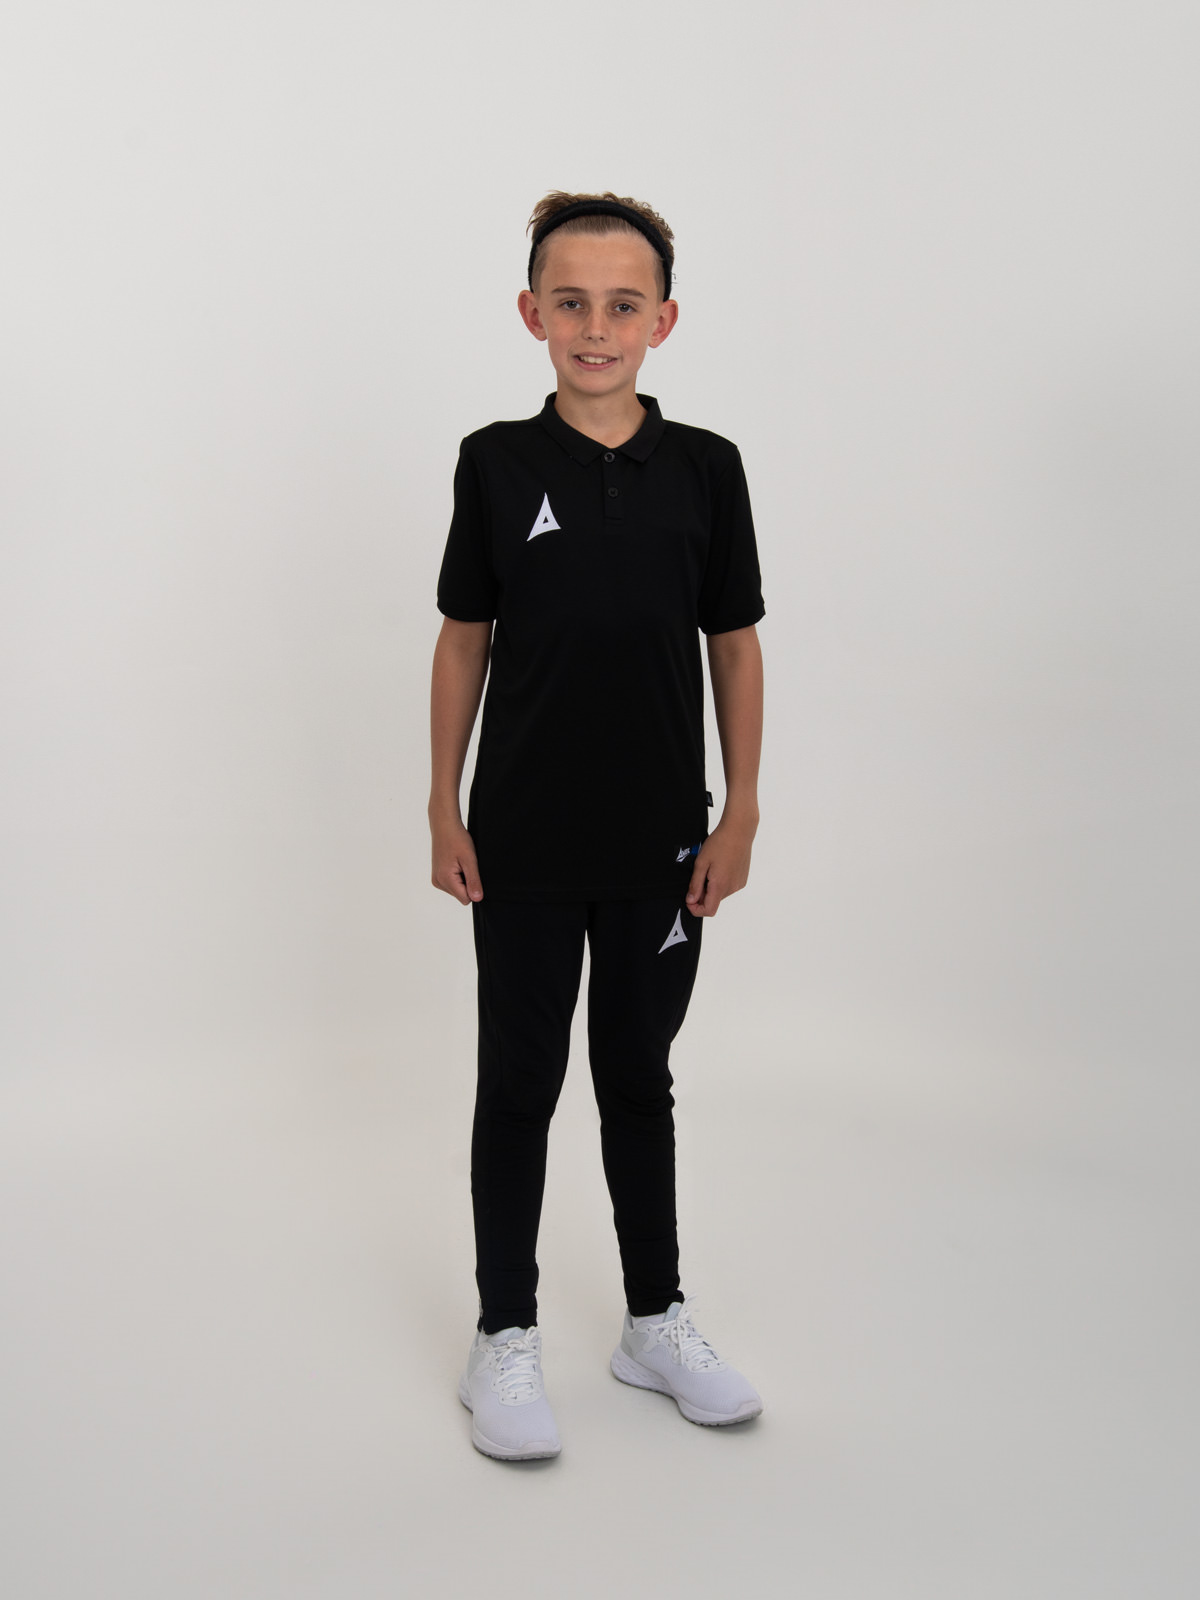 looking smart, this child is wearing a plain black polo shirt with black jogging bottoms